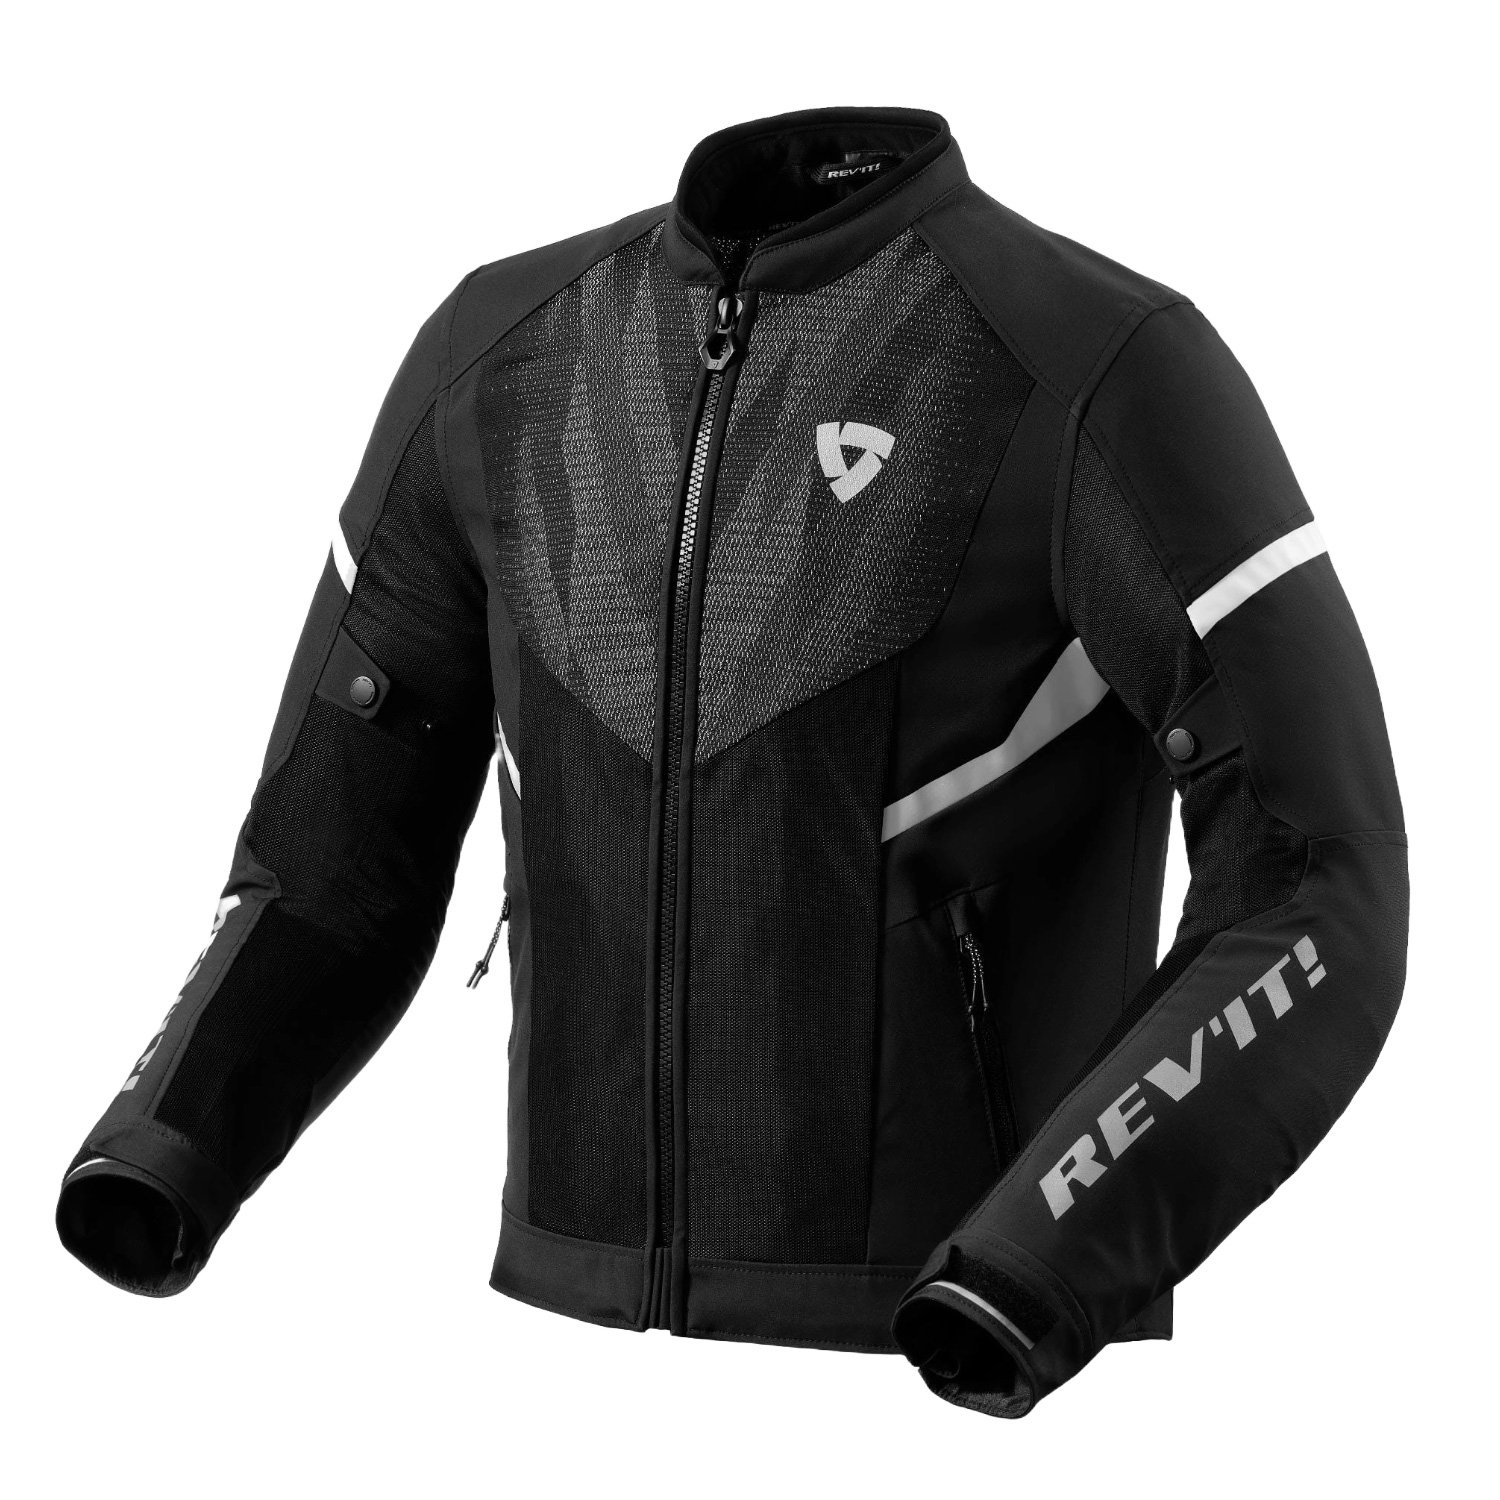 Image of REV'IT! Hyperspeed 2 GT Air Jacket Black White Size 3XL ID 8700001367691